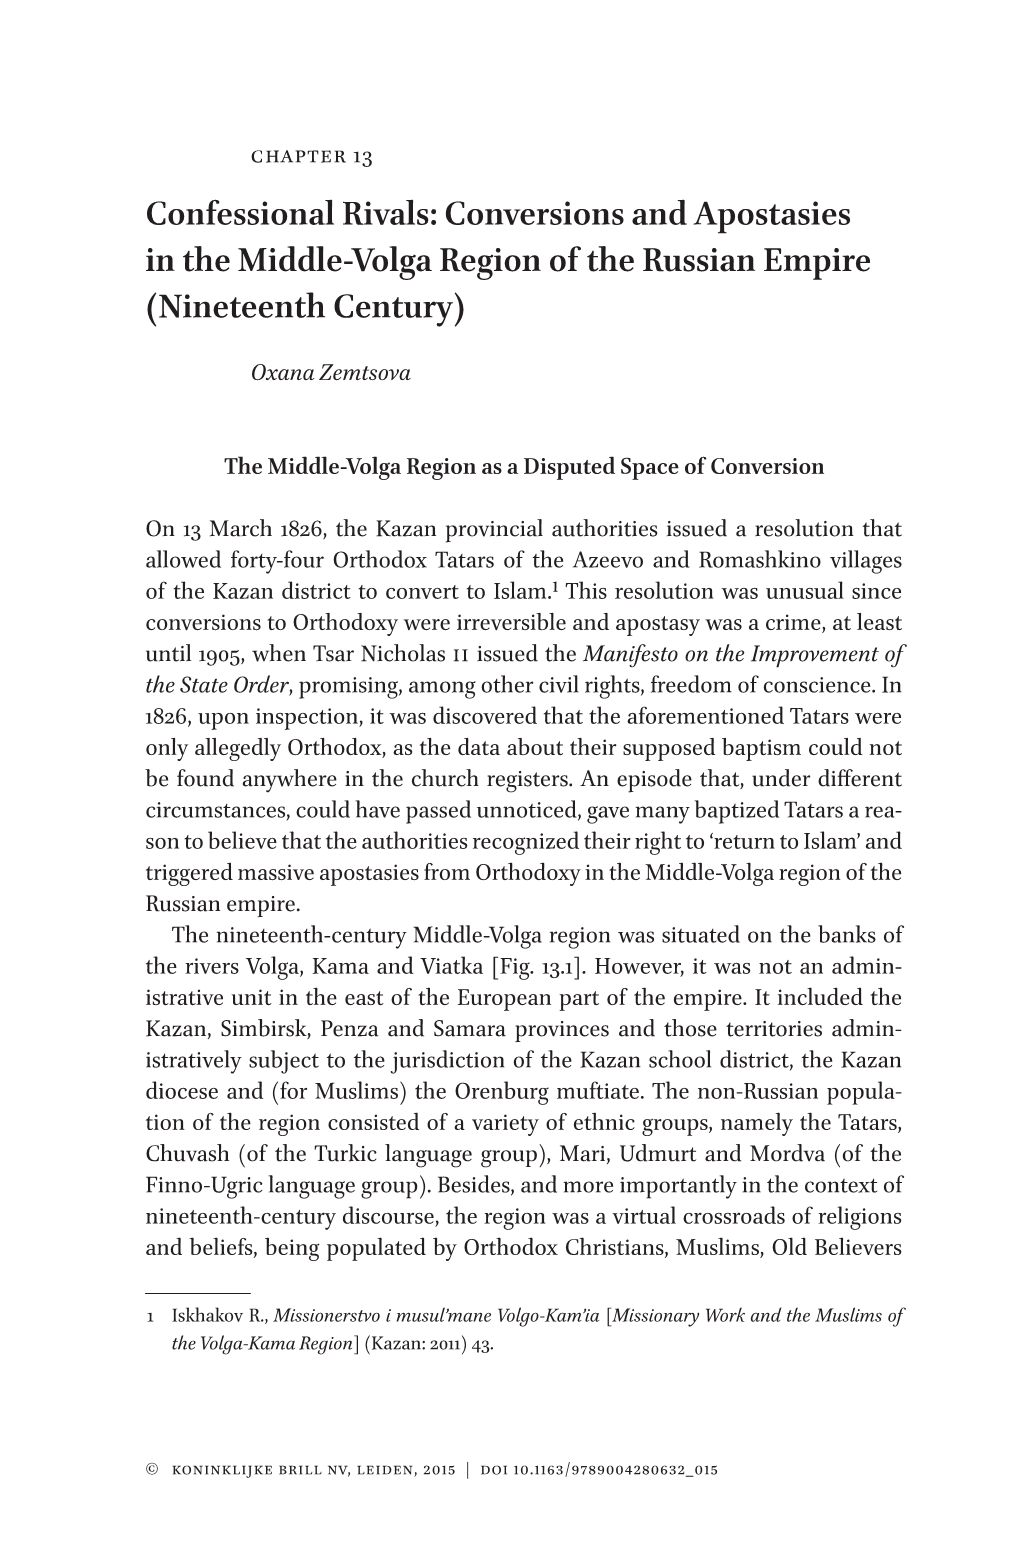 Conversions and Apostasies in the Middle-Volga Region of the Russian Empire (Nineteenth Century)